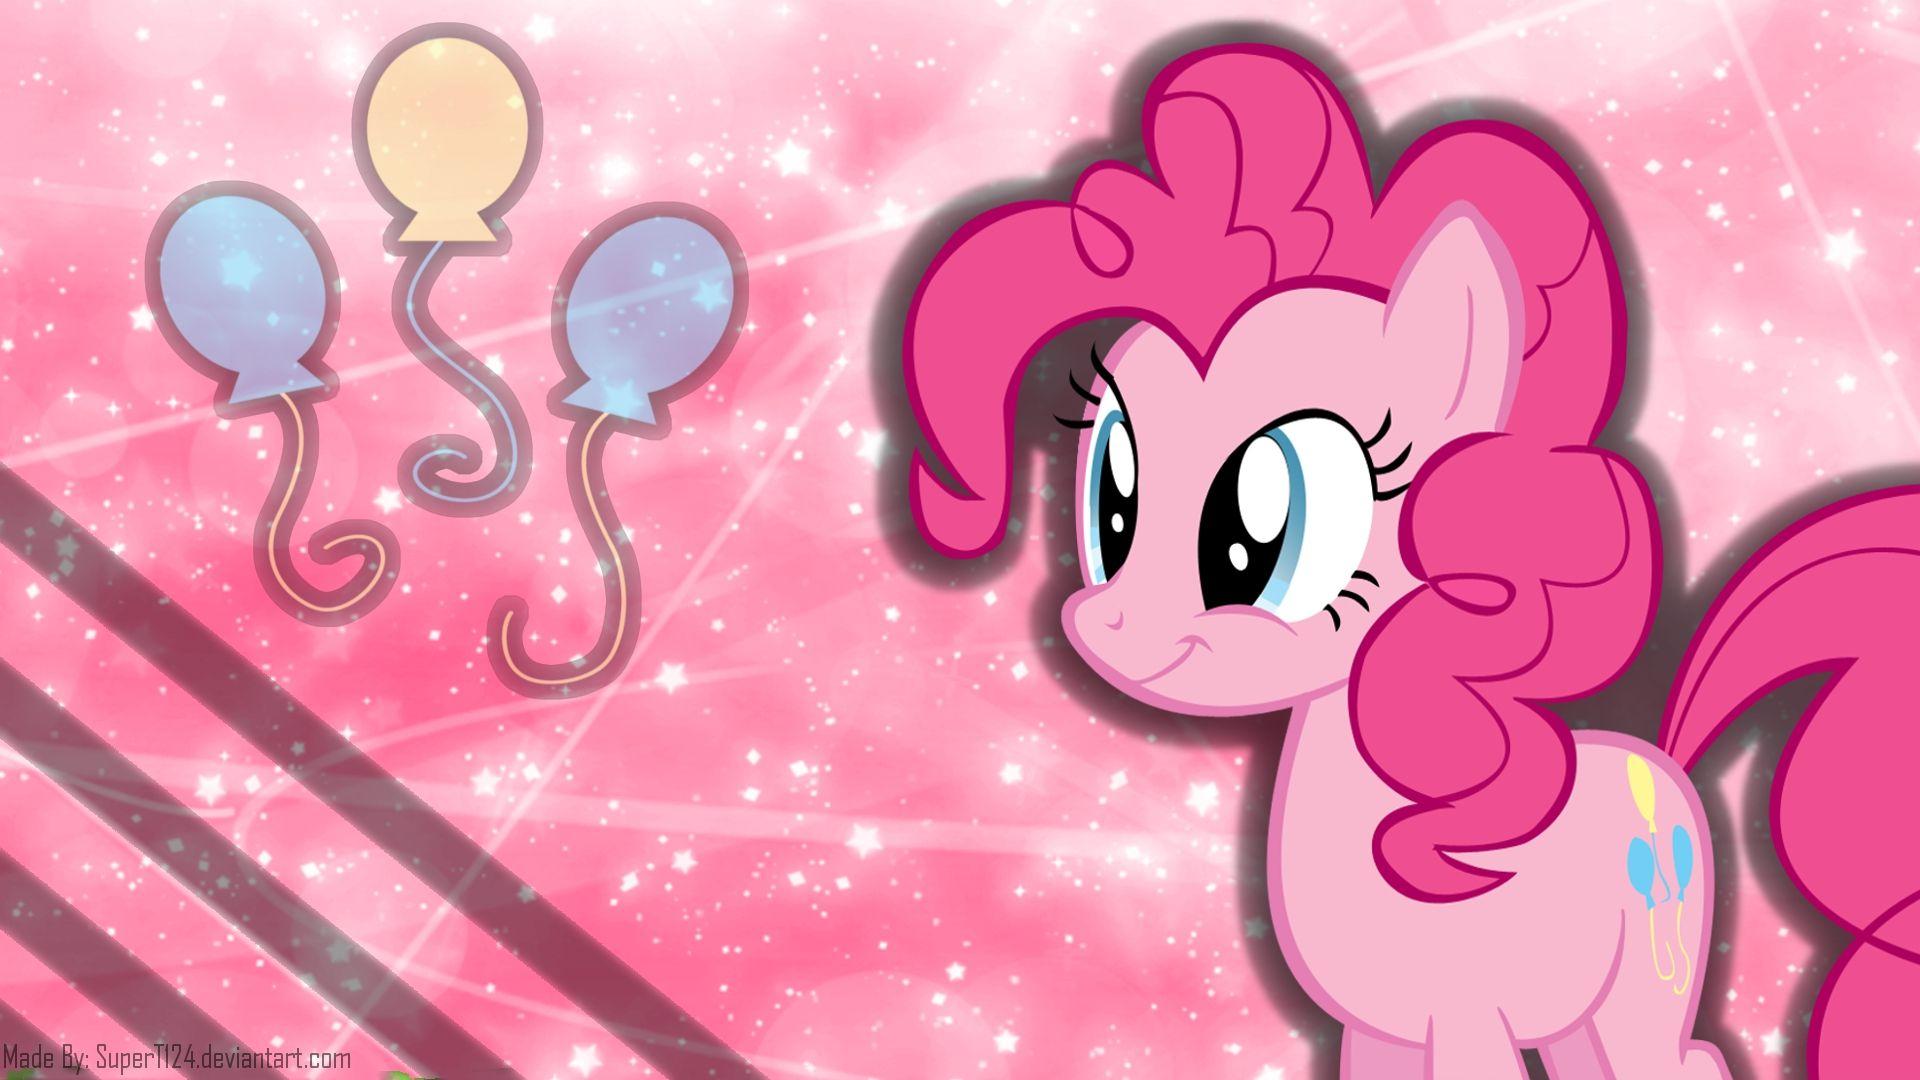 Pinkie Pie Wallpapers - Wallpaper Cave